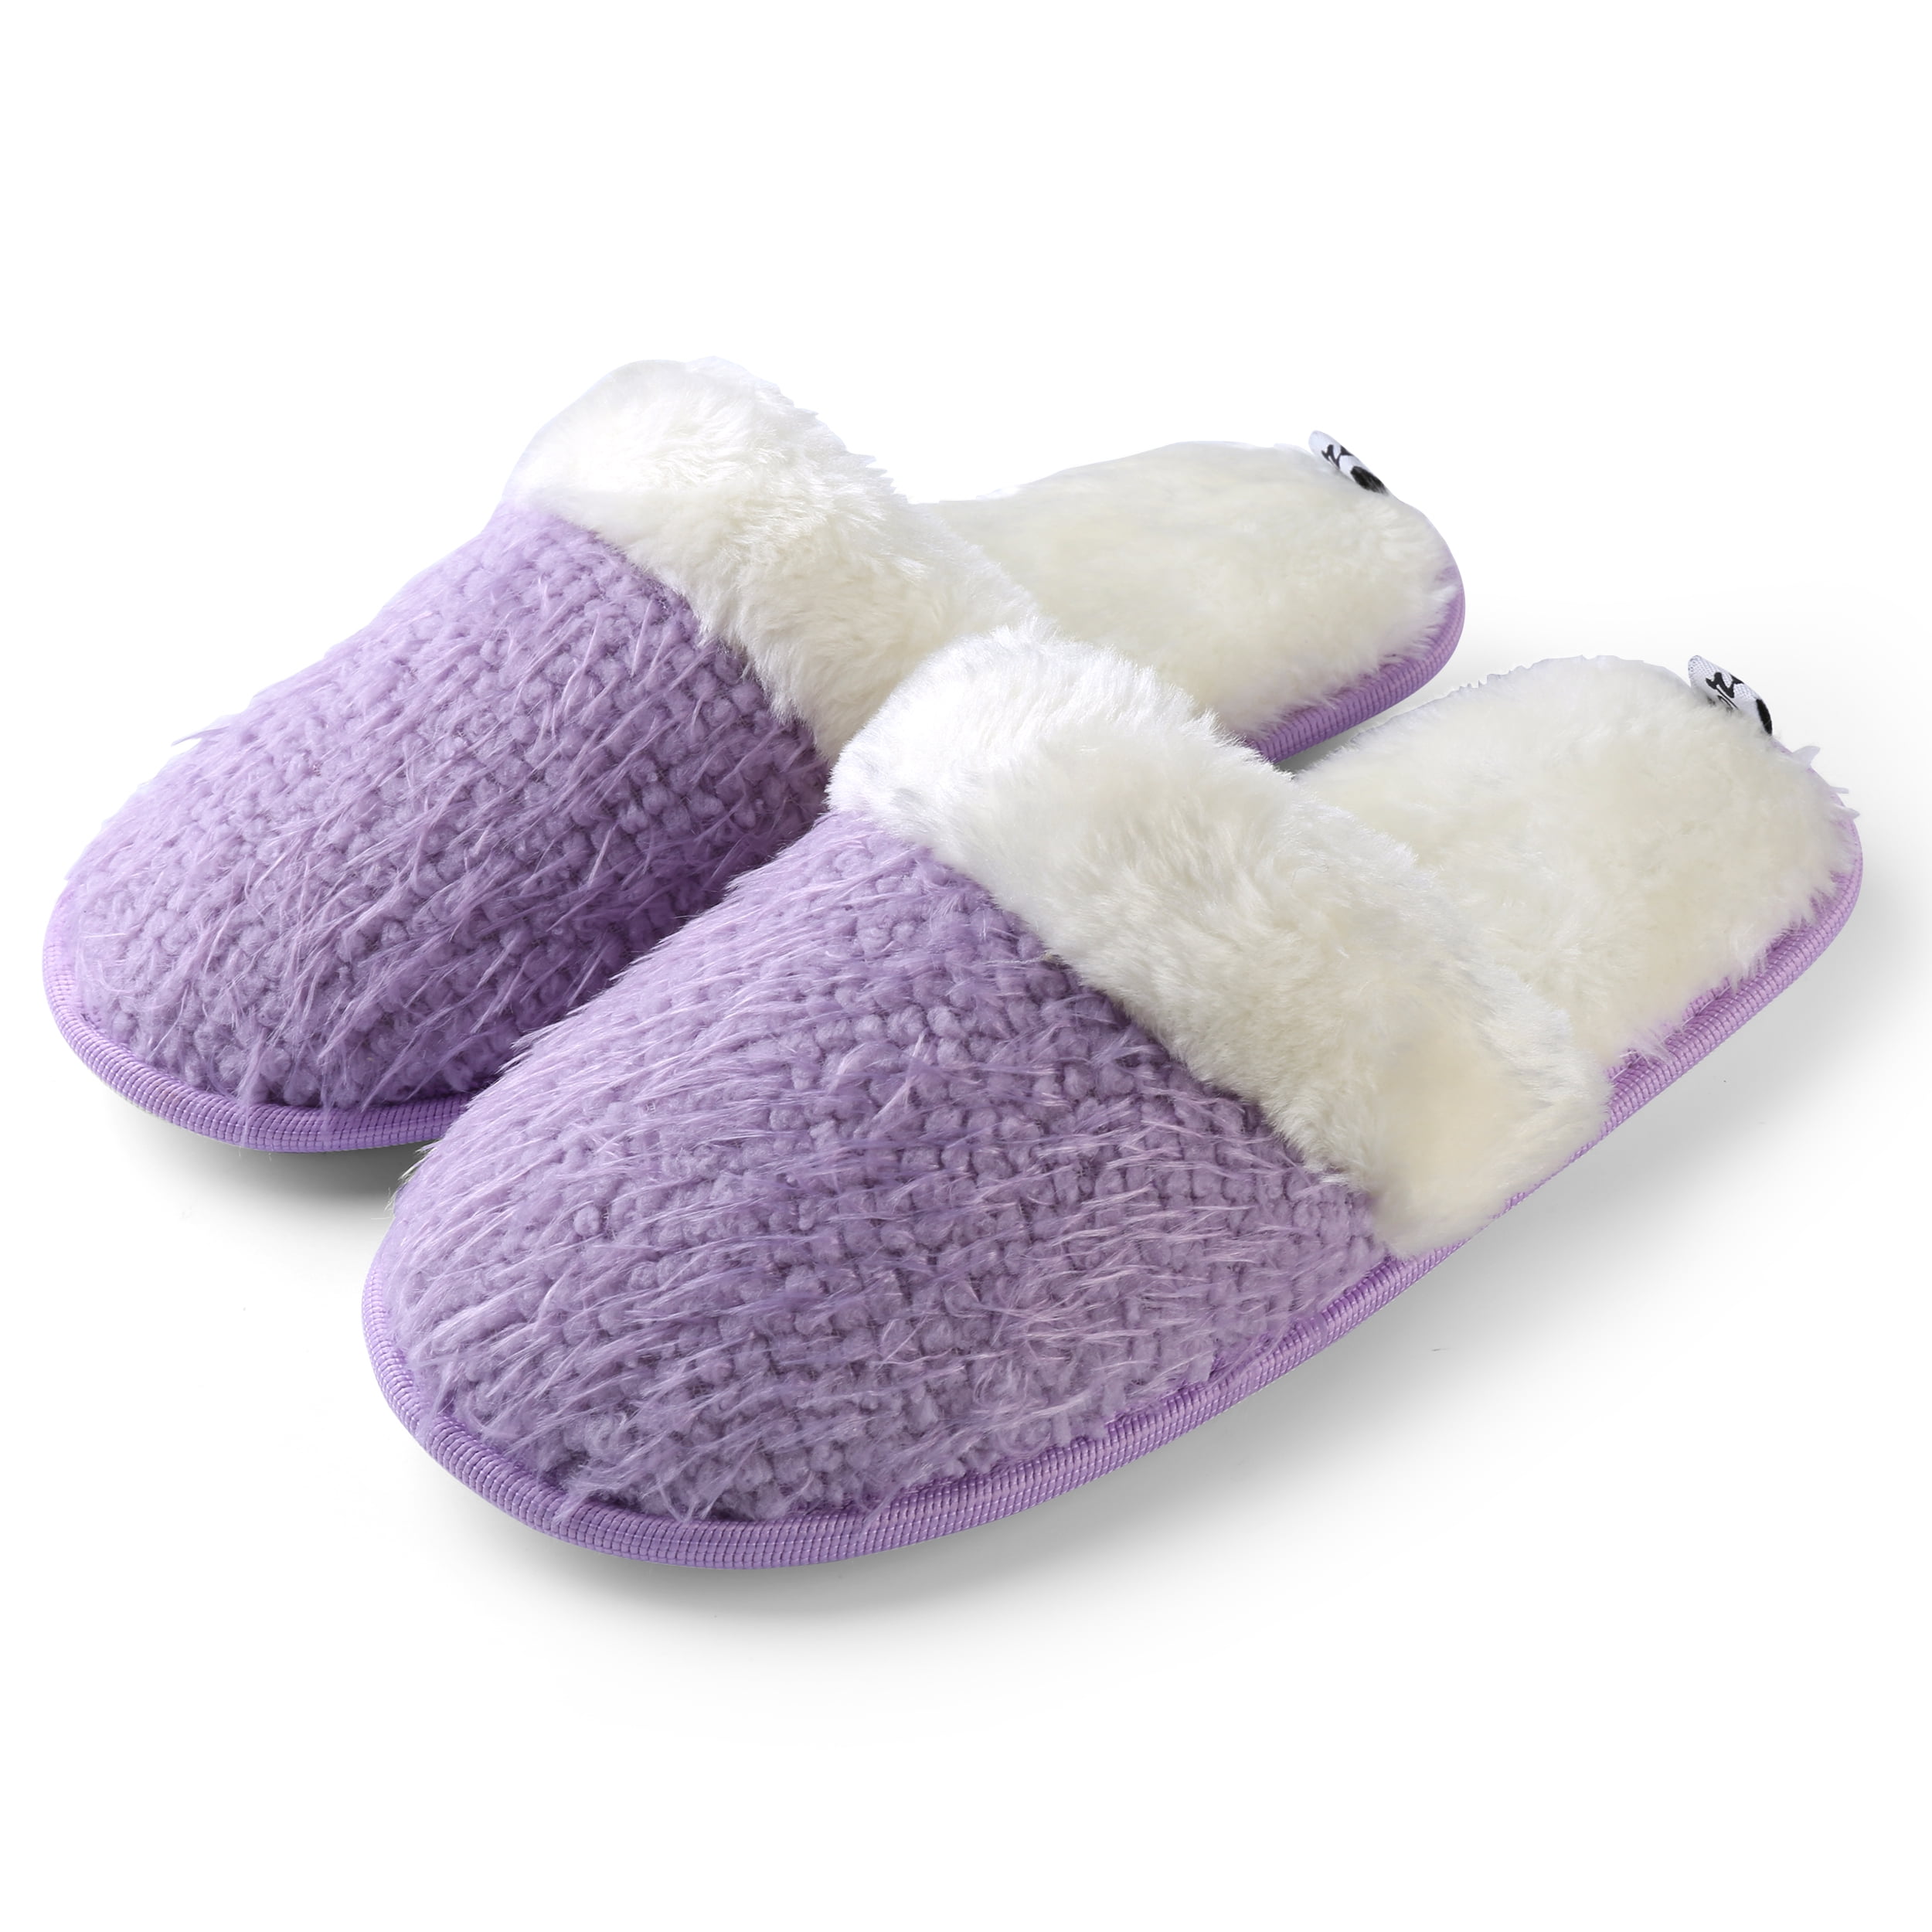 warm comfy slippers